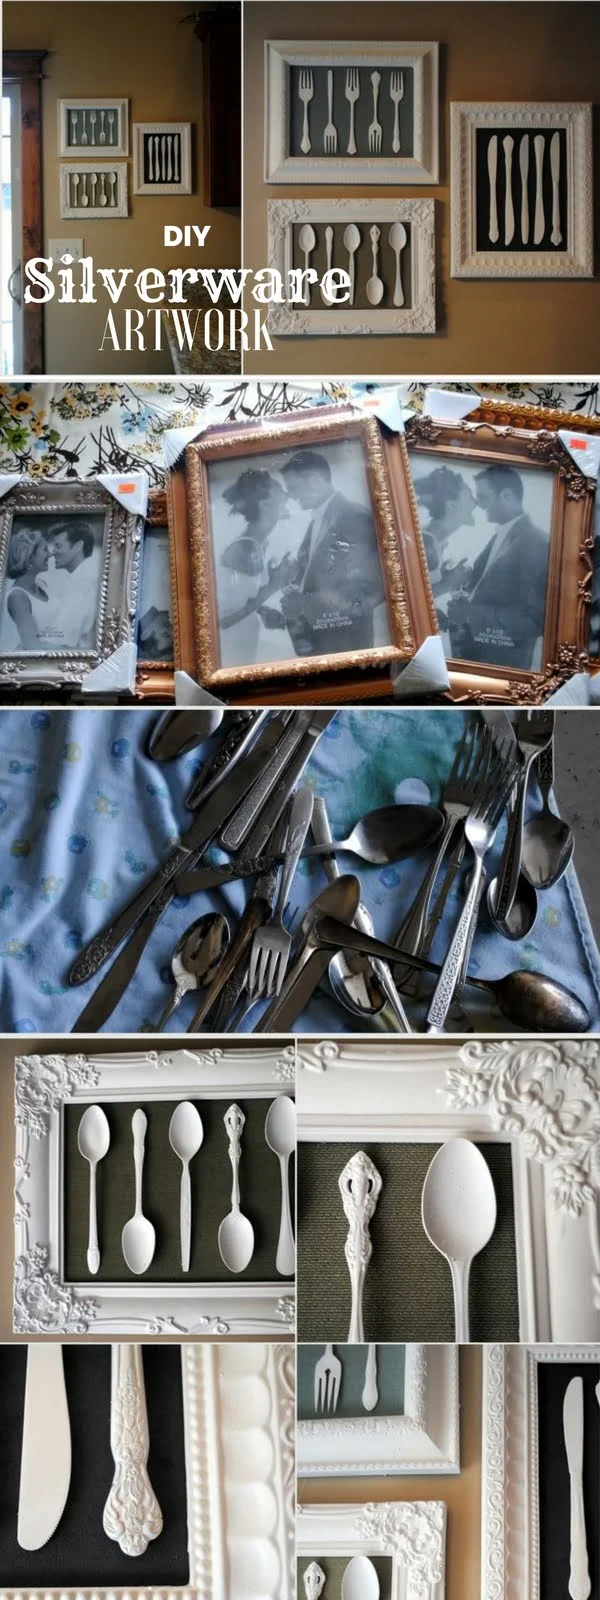 Check out the tutorial:  Silverware Artwork